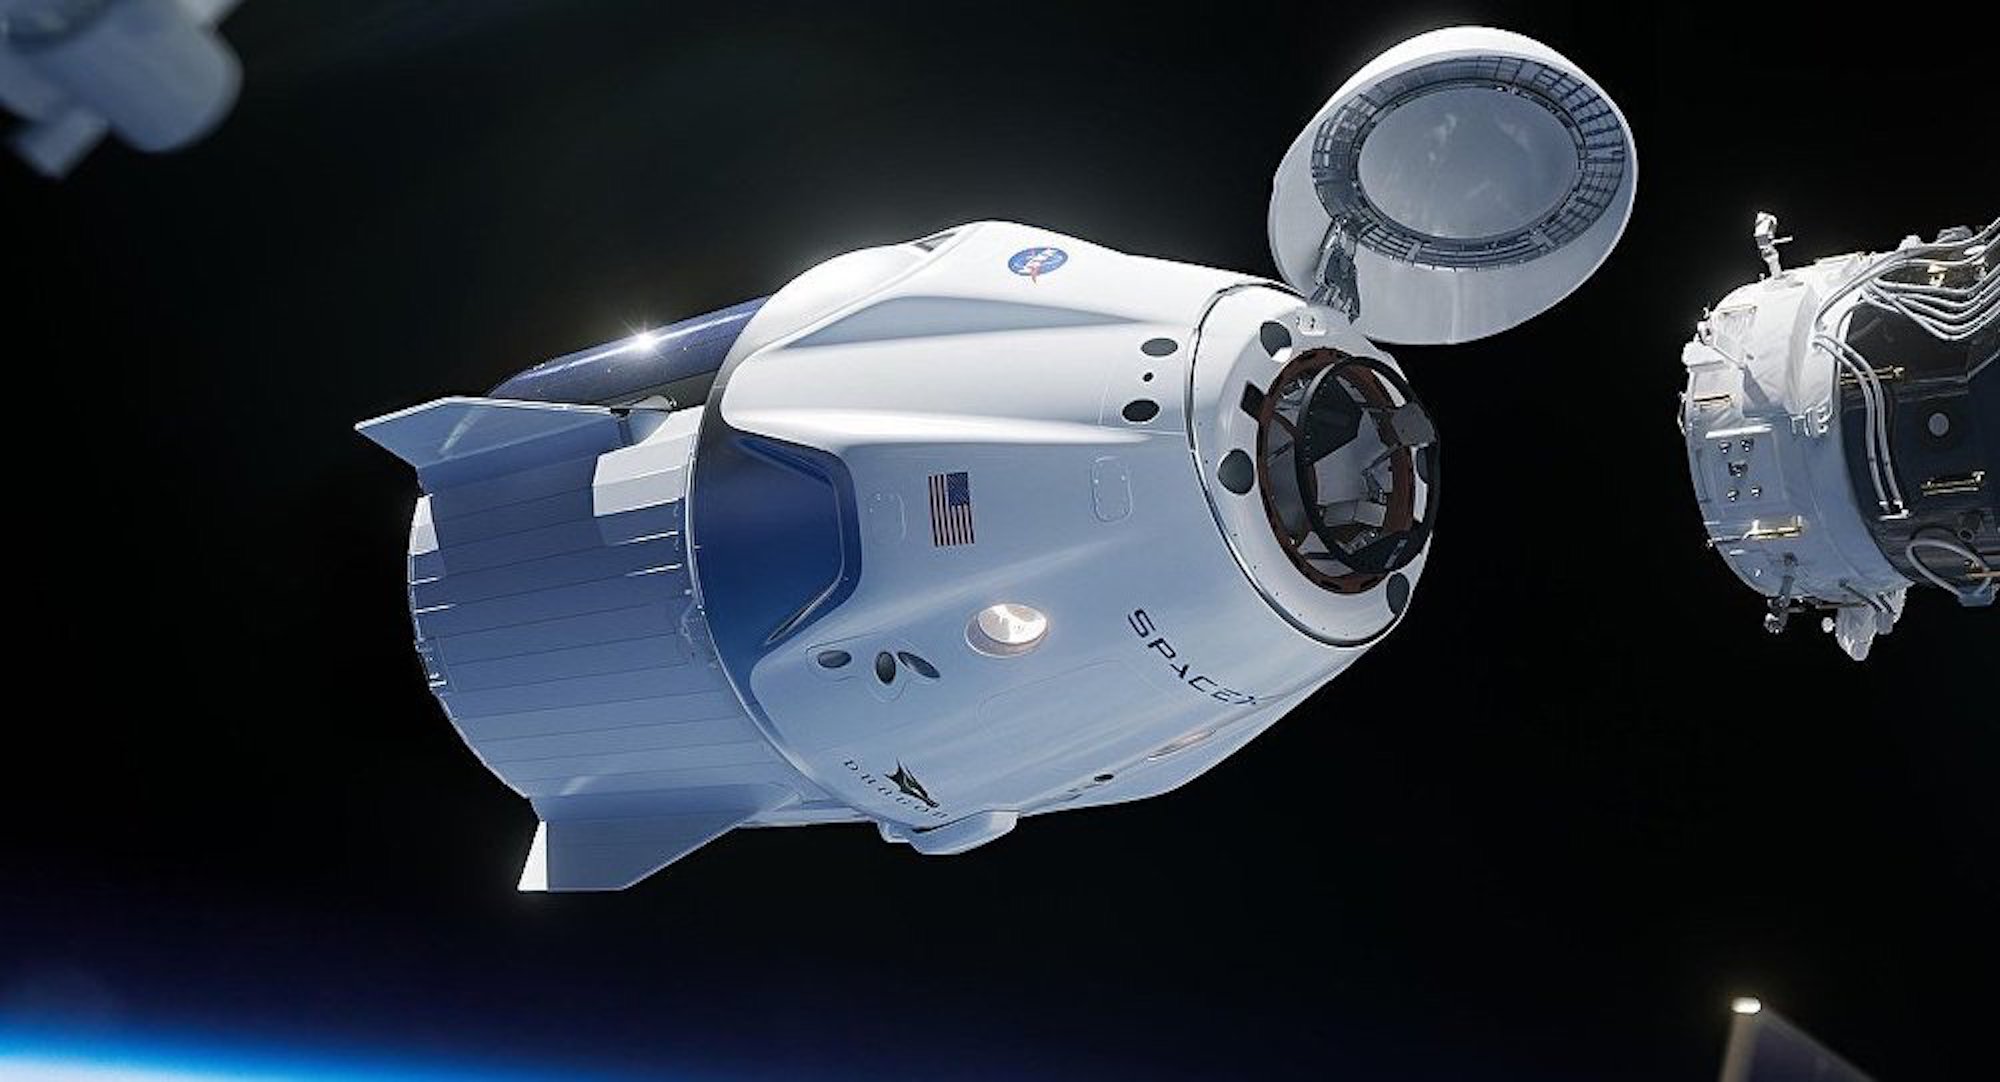 Artist's impression of SpaceX's Crew Dragon capsule docking with the International Space Station. Credit: SpaceX